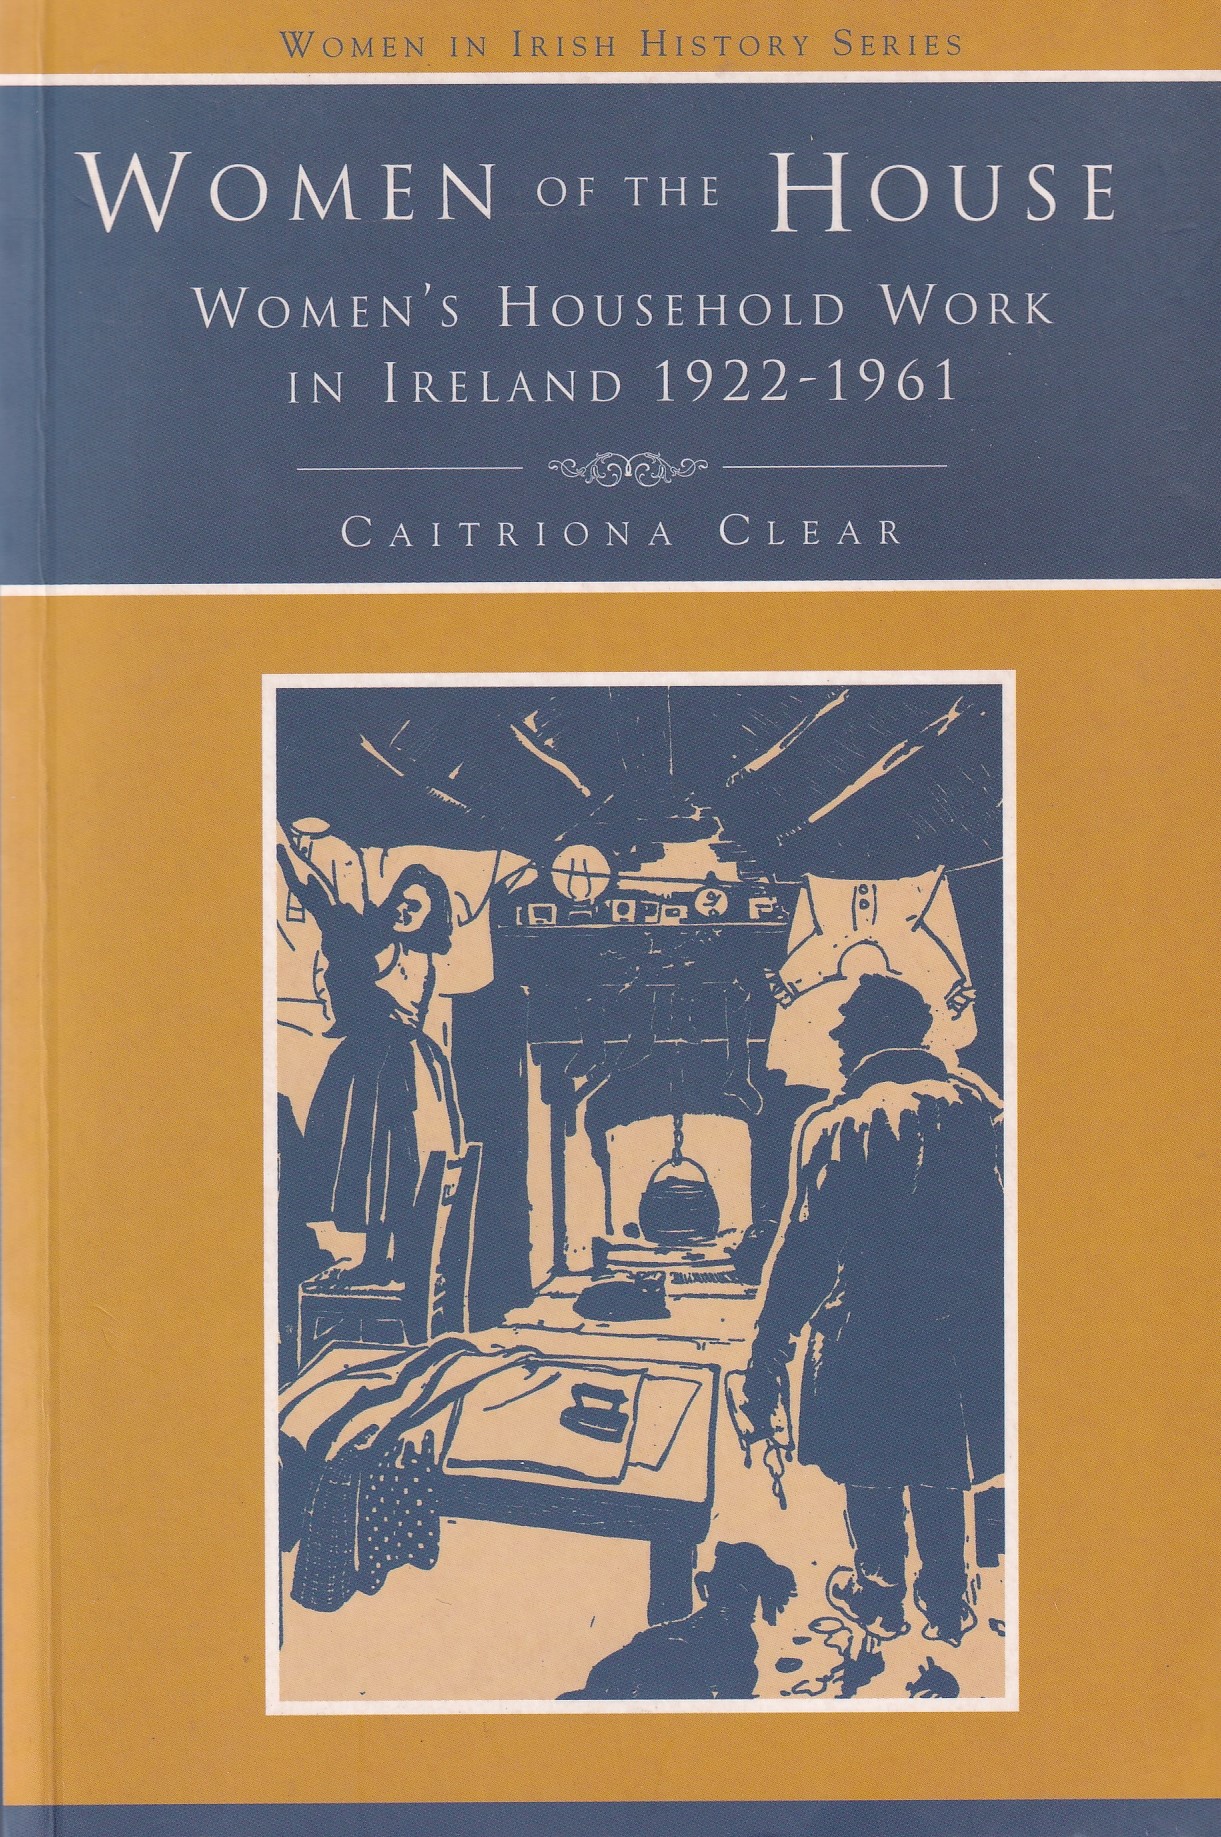 Women of the House: Women’s Household Work in Ireland, 1922-1961 [Signed] | Catriona Clear | Charlie Byrne's